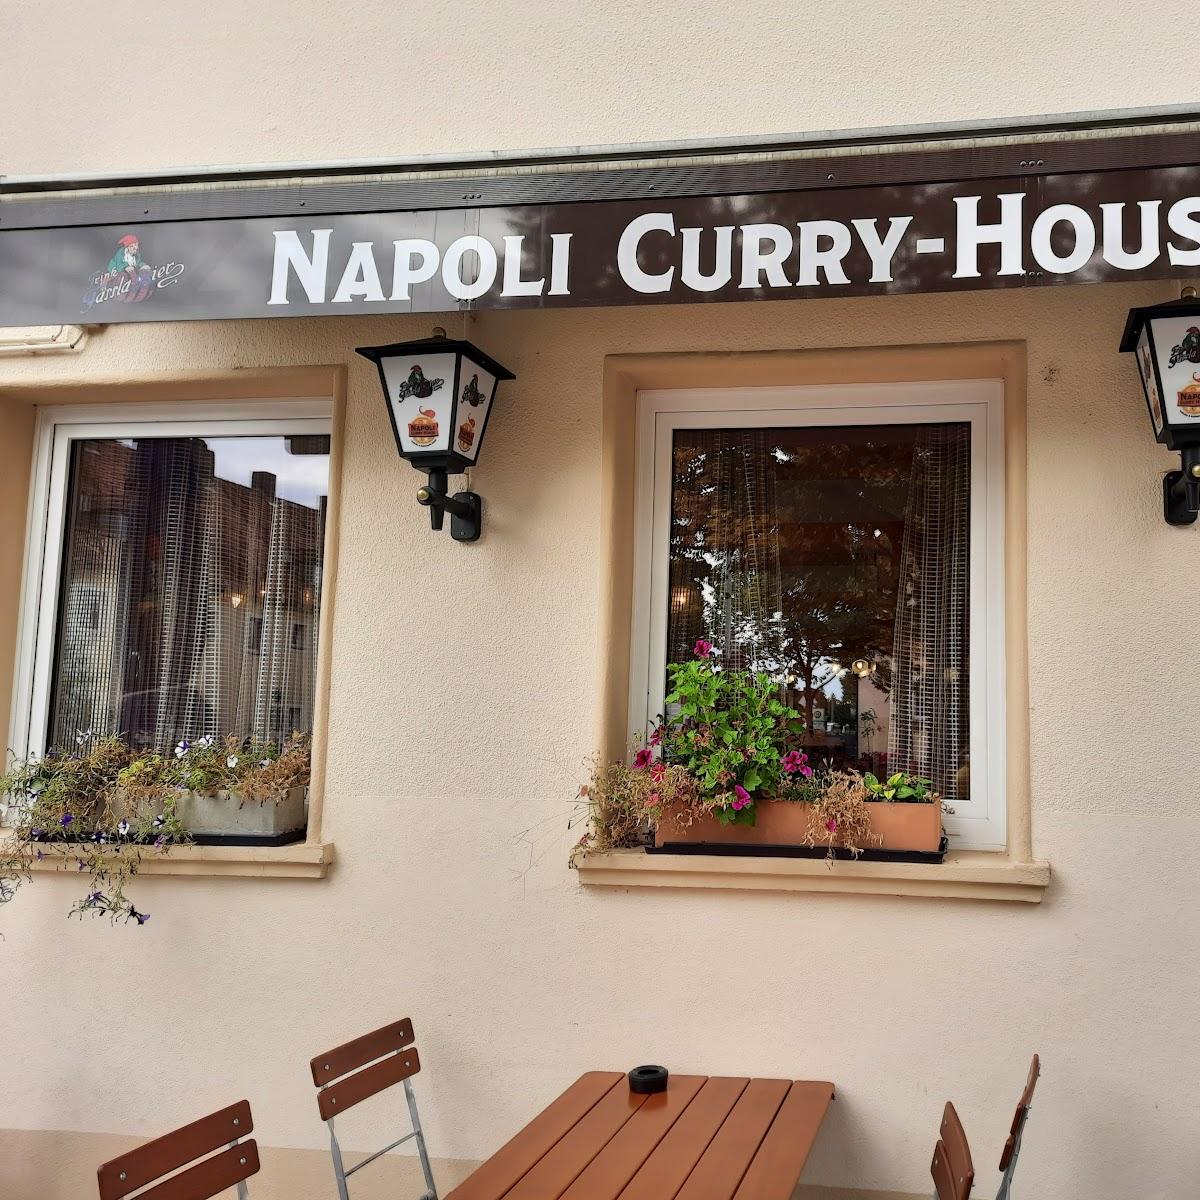 Restaurant "Napoli curry house" in Bamberg